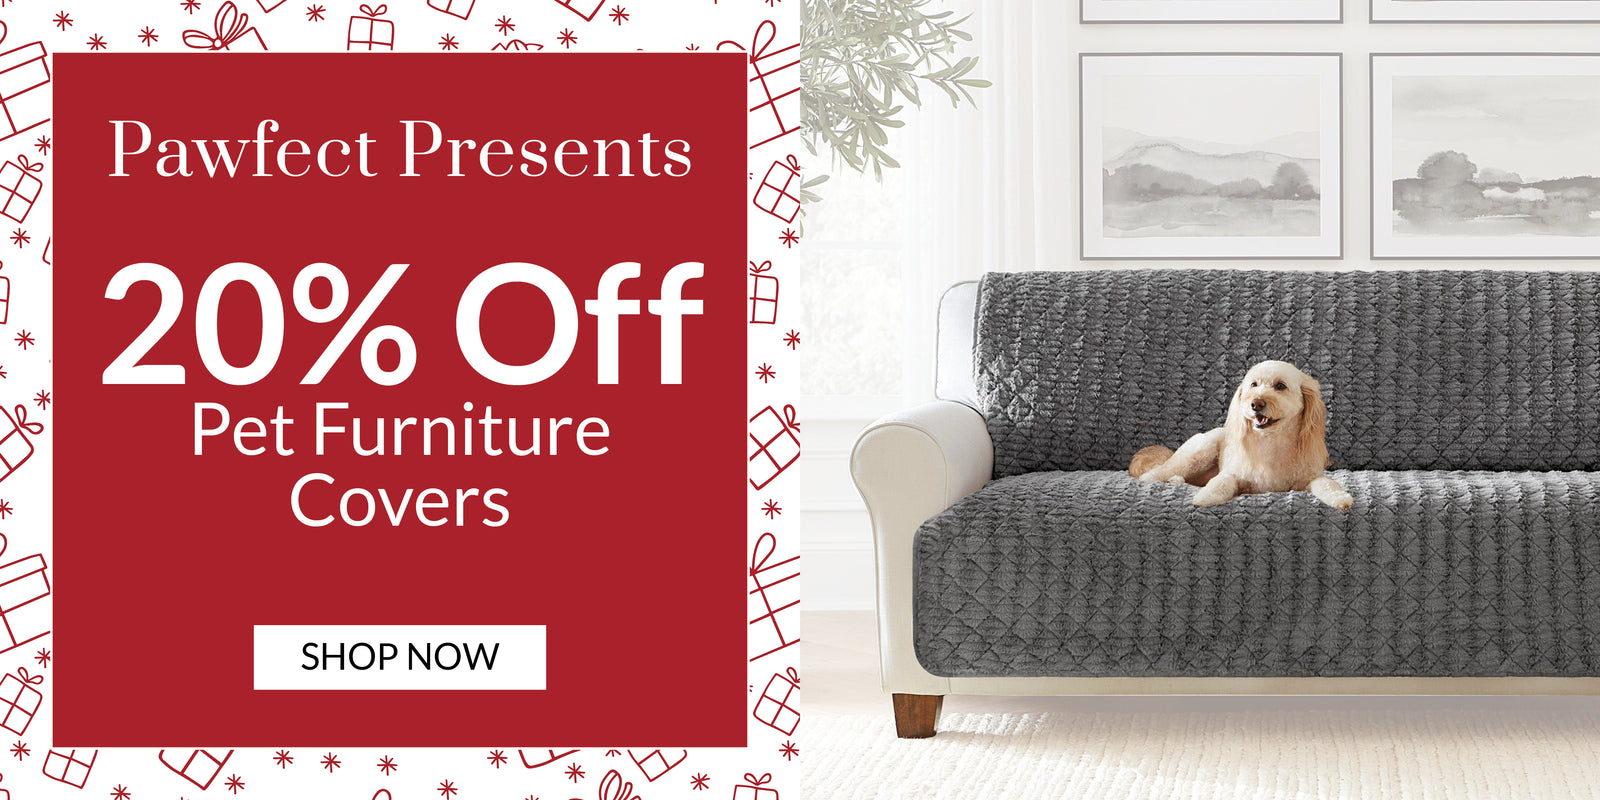 SF-Pawfect-Presents-20-percent-off-Pet-Furniture-Covers-Hompage-Banner-Desktop